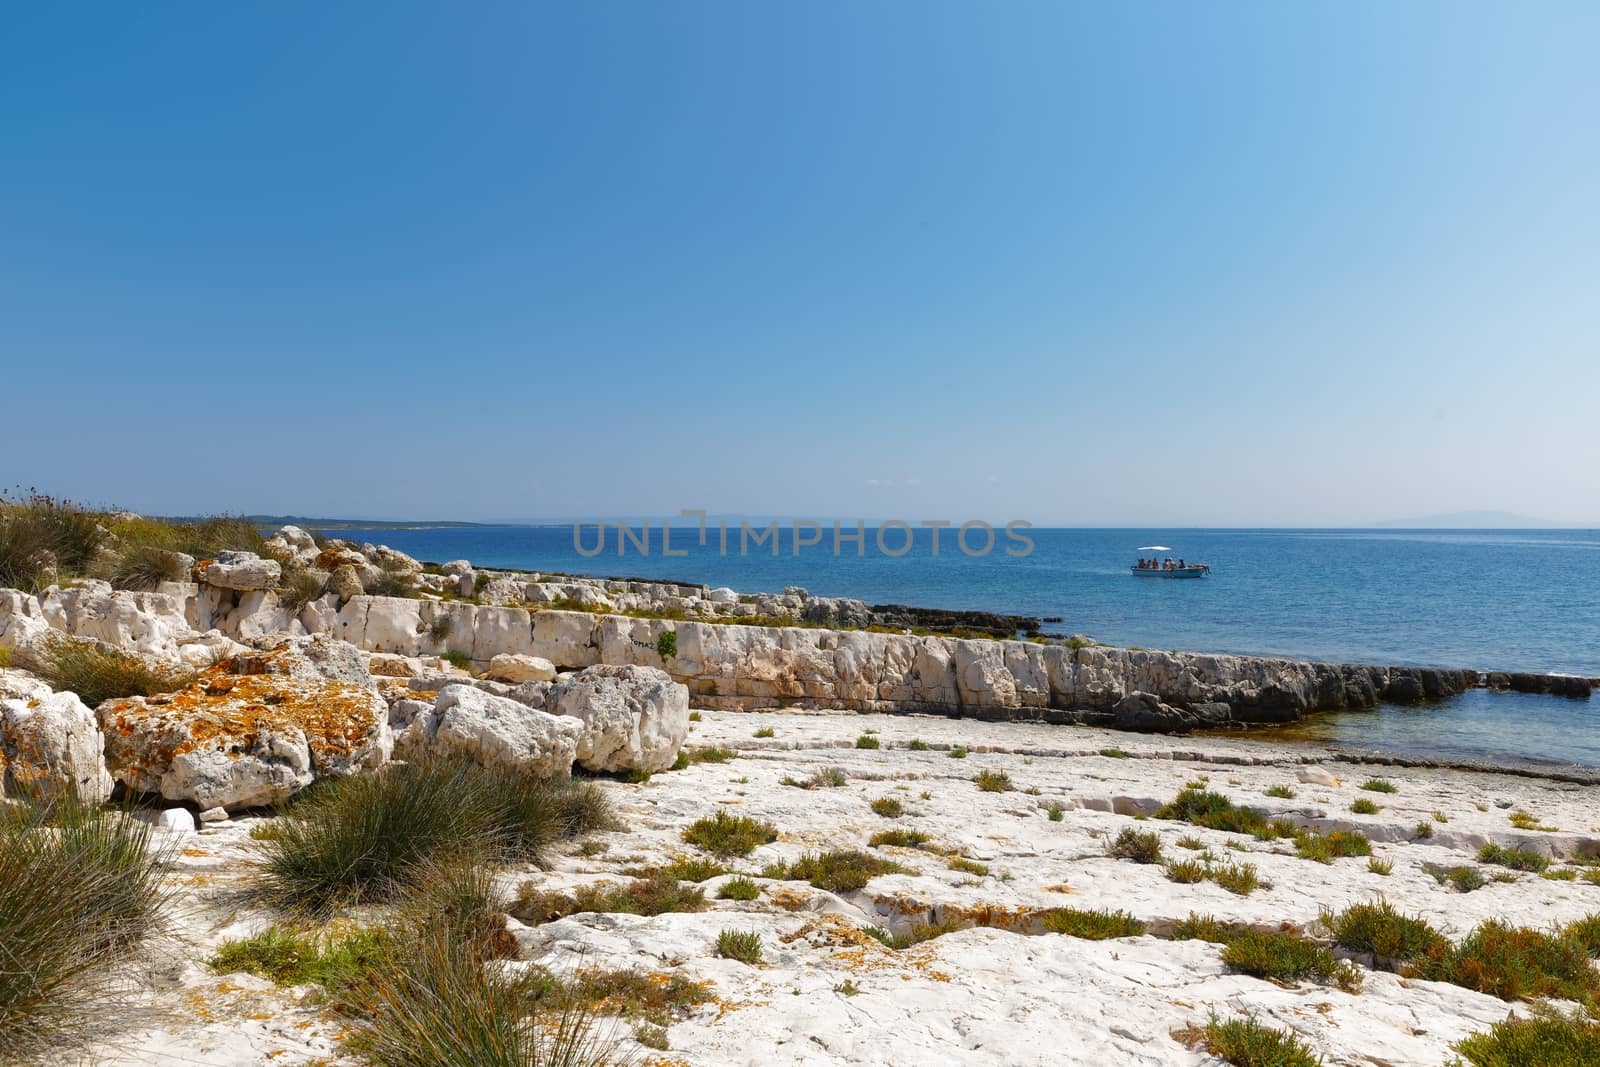 Shores of an island in the mediterraneans scenic photo